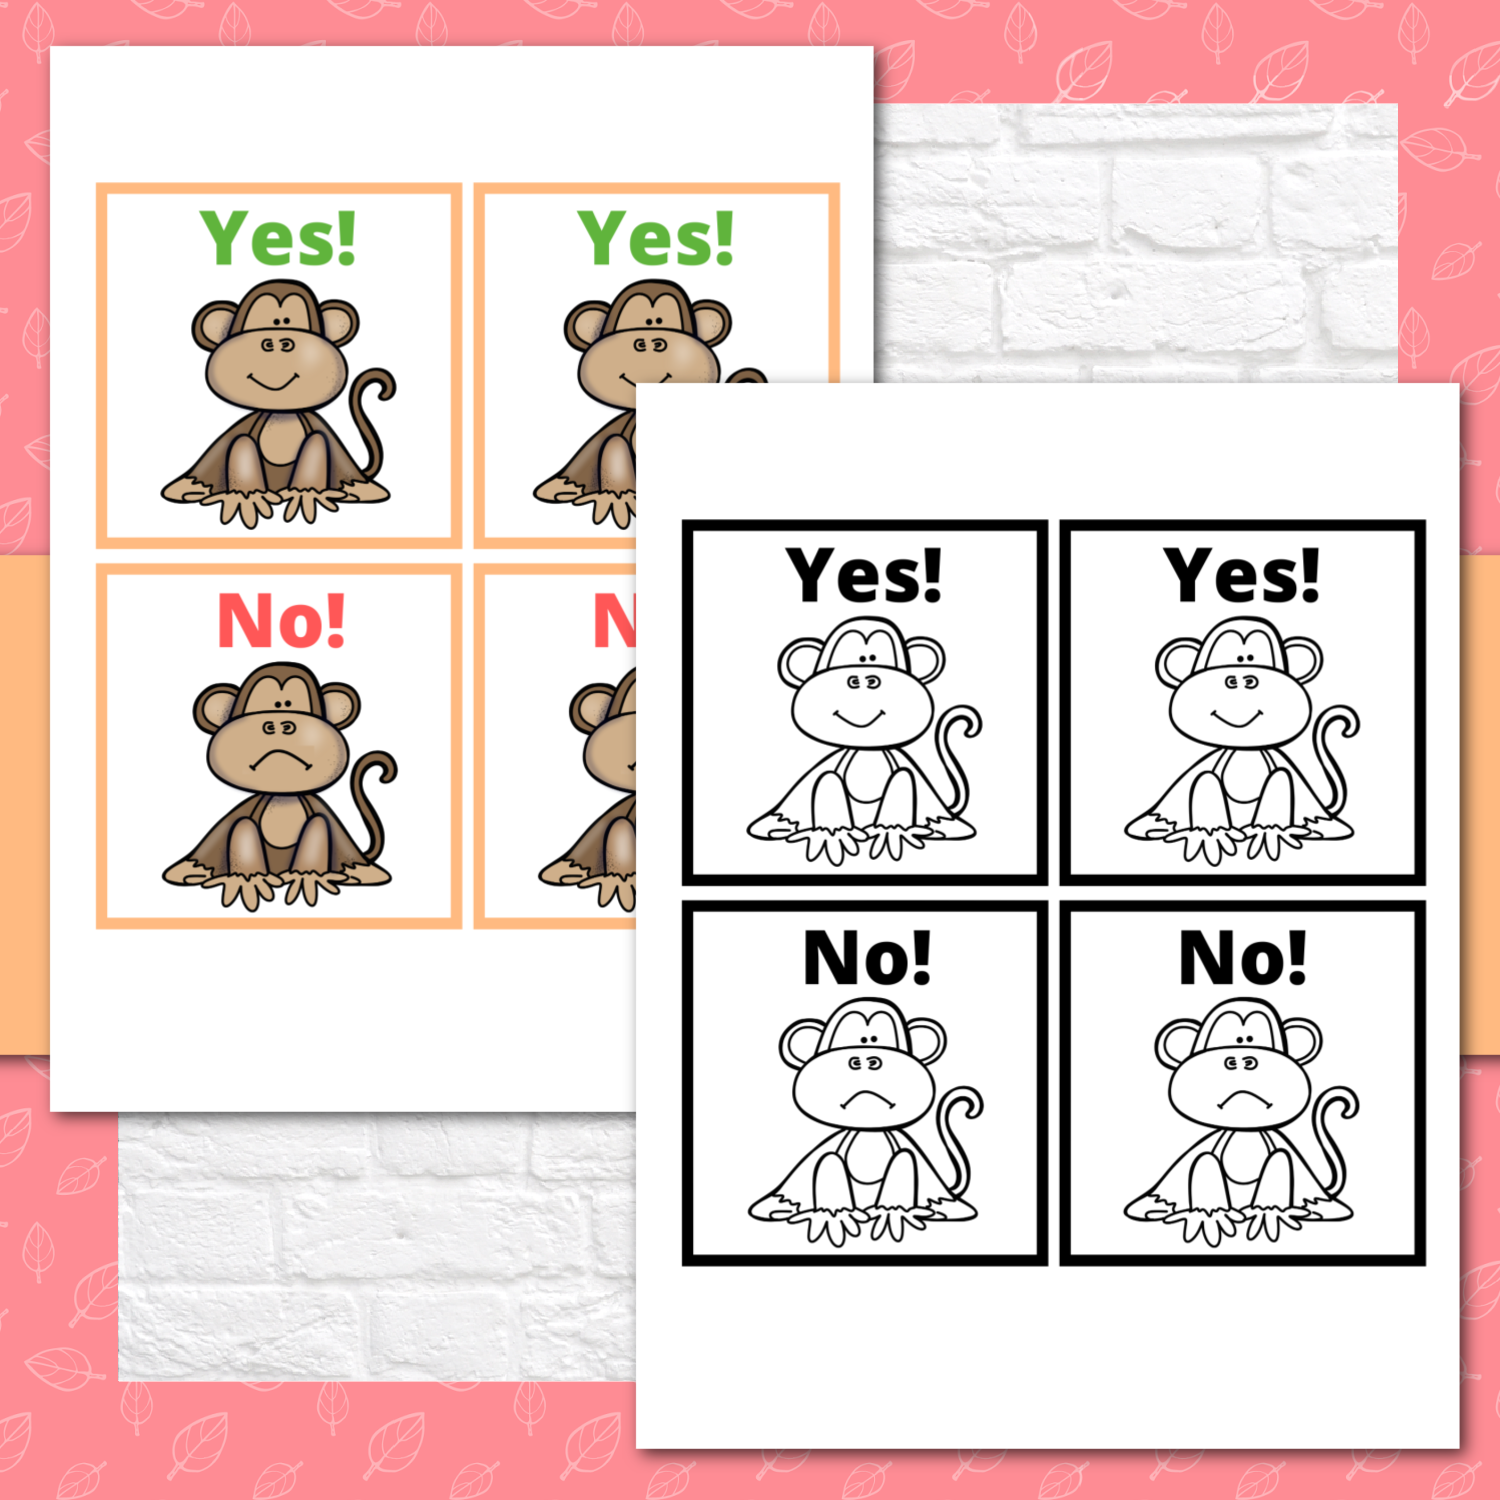 Smart Monkey Game for Studying Any Lesson - Lesson Review Bible Games for Youth